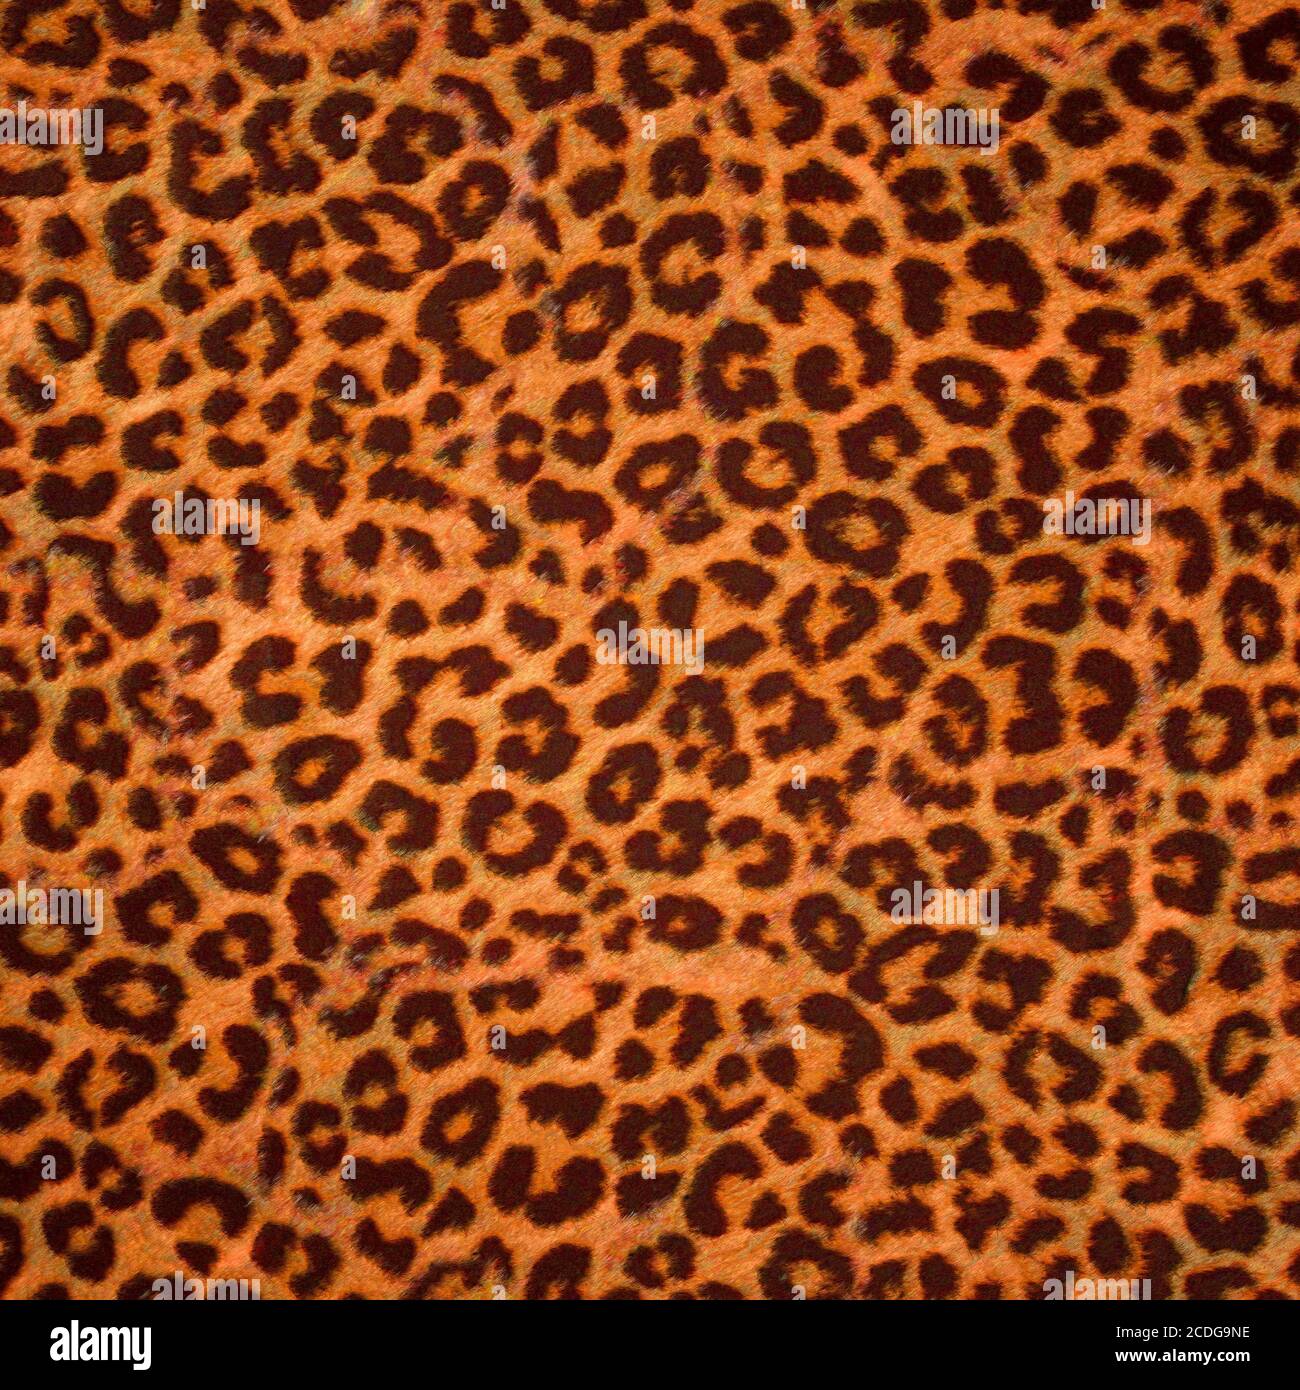 Leopard skin background or texture Stock Photo